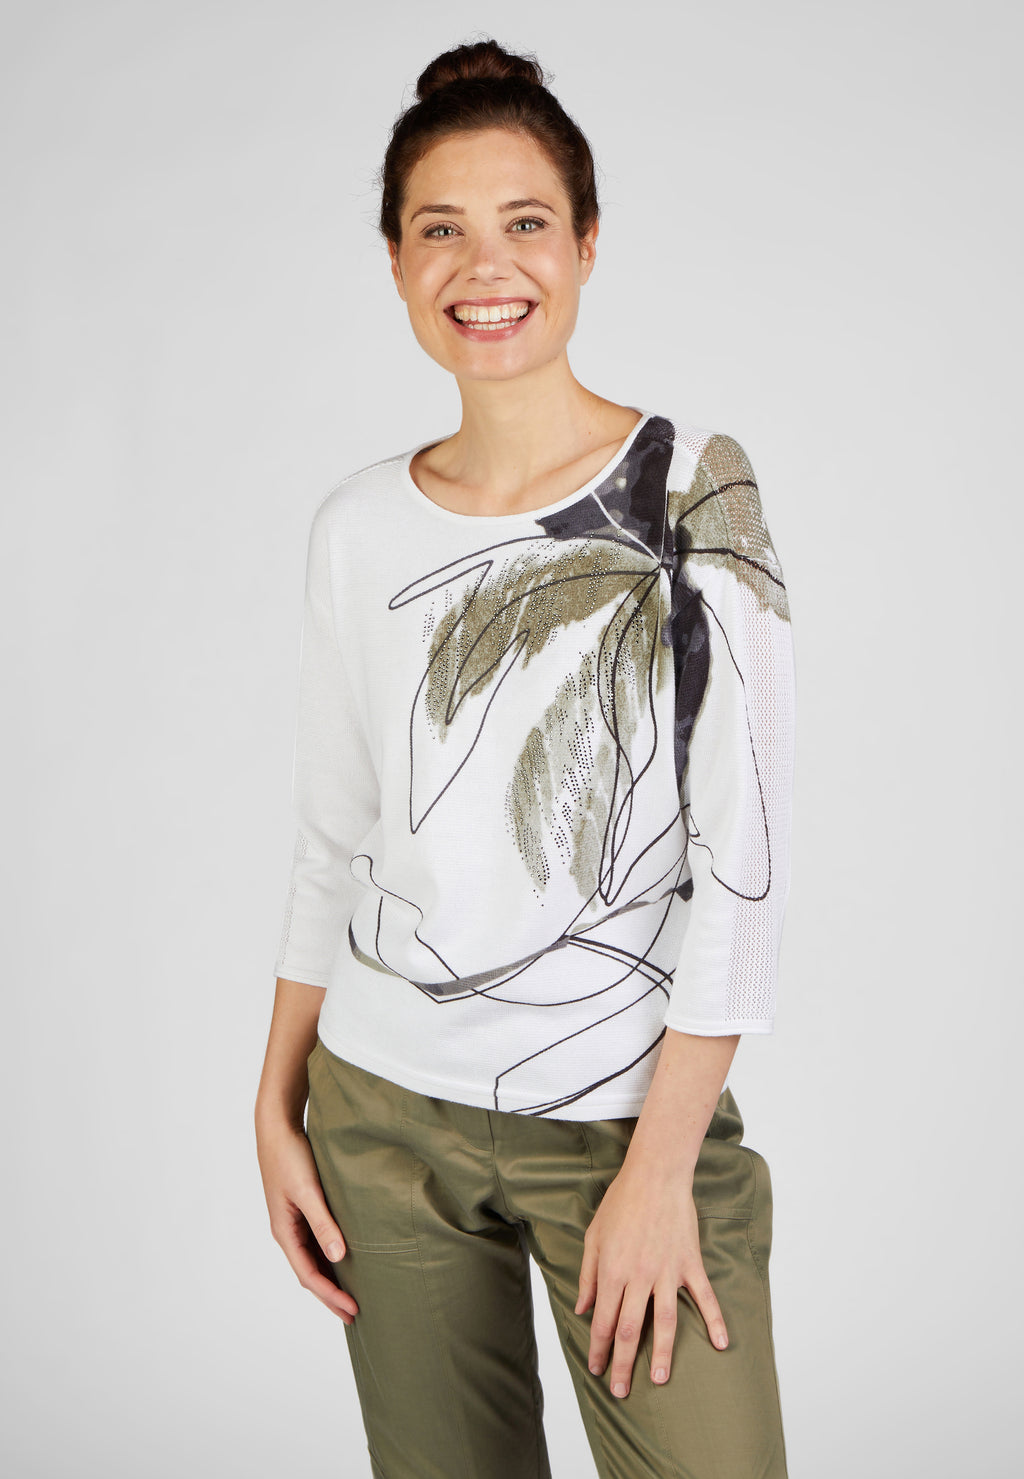 Rabe herbal garden collection khaki green leaf printed white knit jumper, product code 52-221605